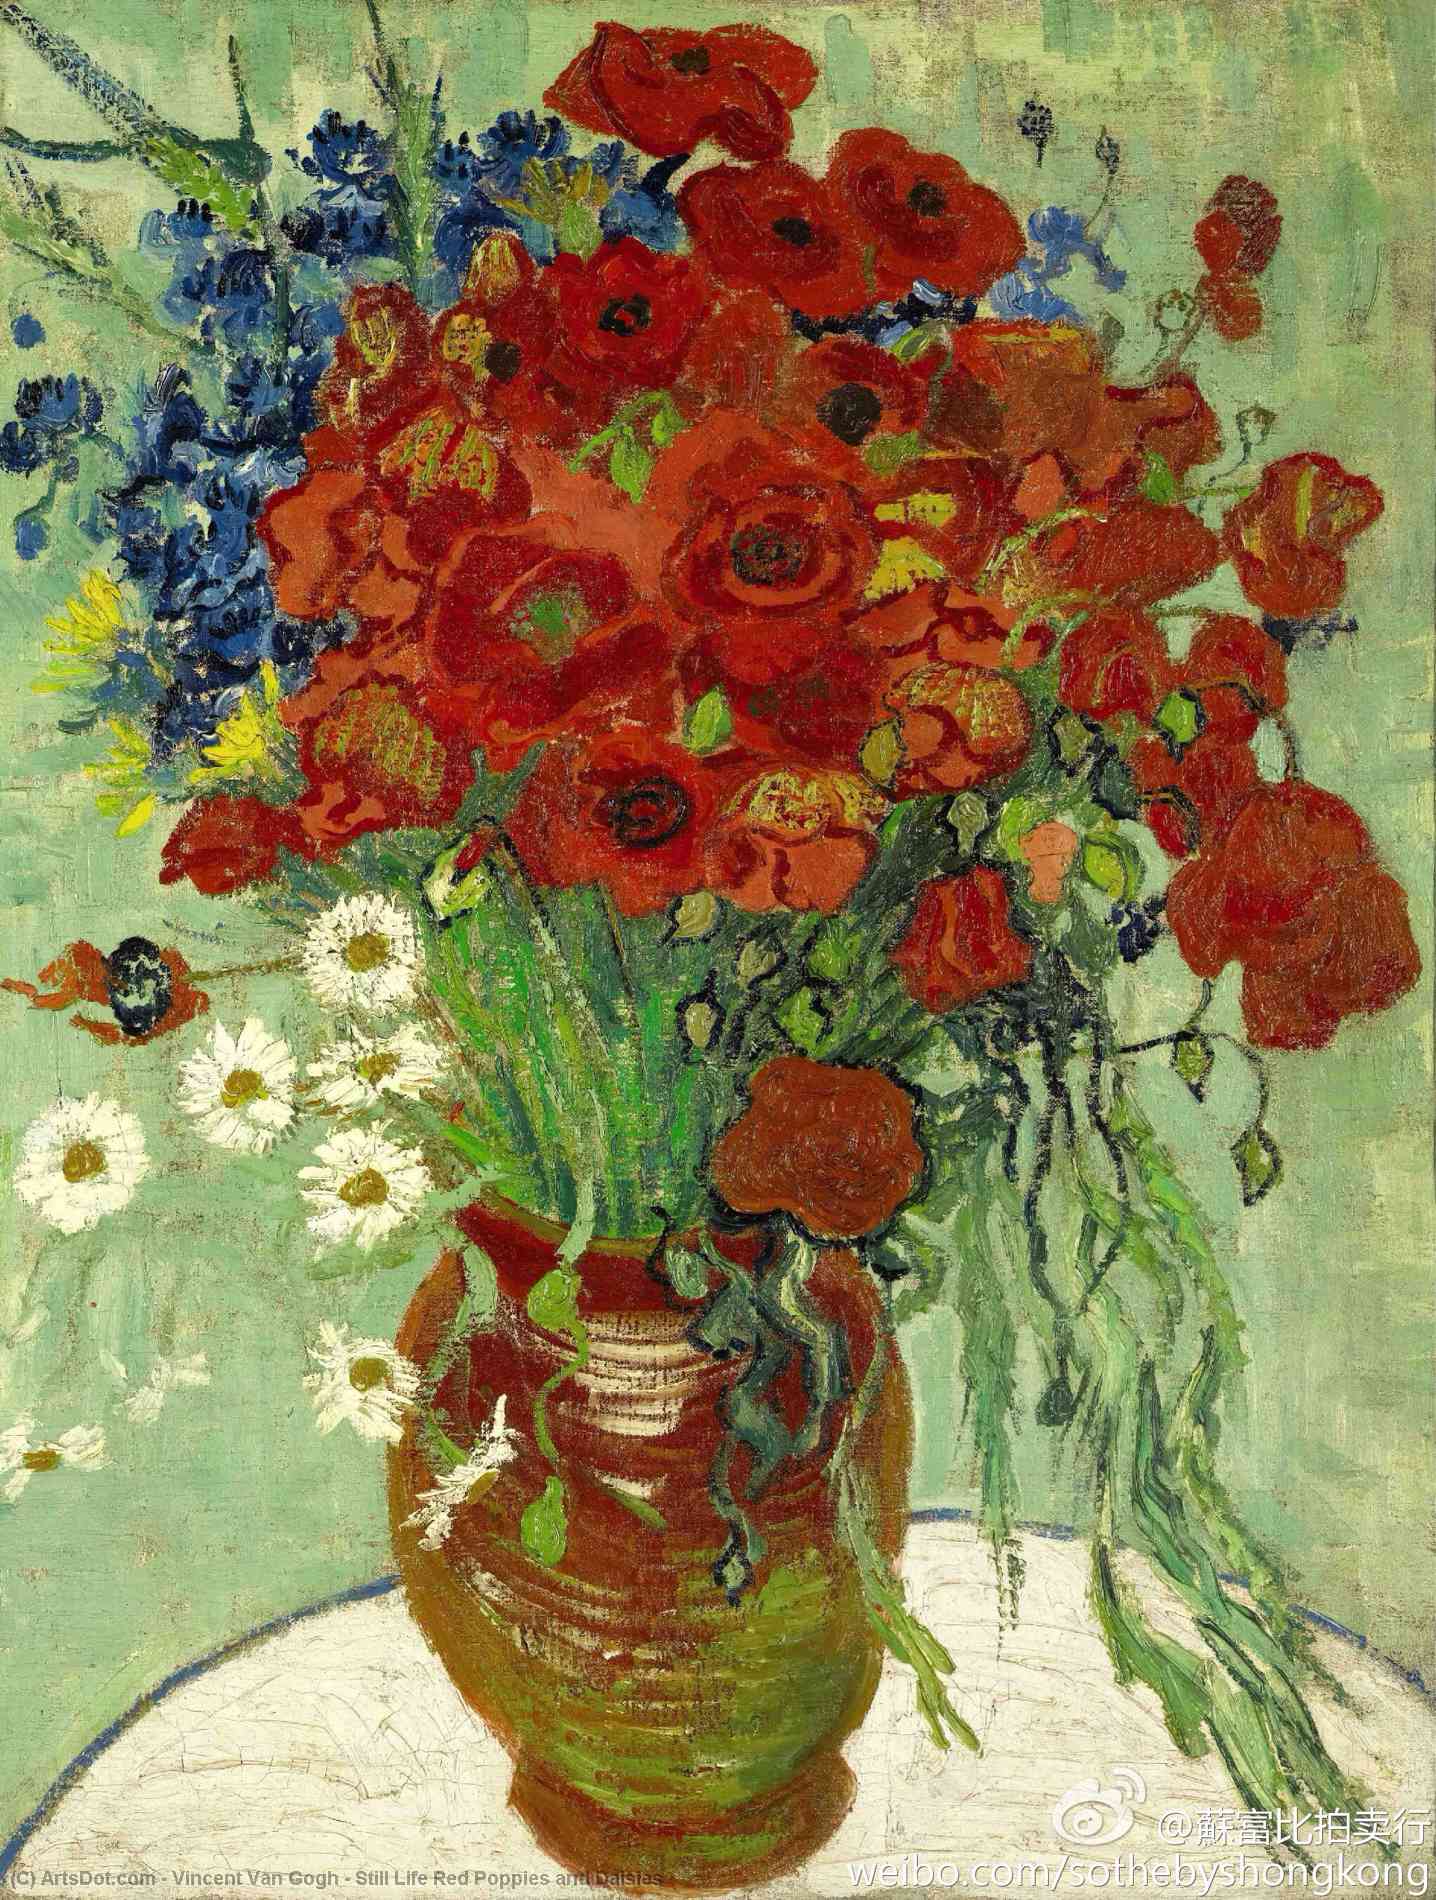 WikiOO.org - Encyclopedia of Fine Arts - Lukisan, Artwork Vincent Van Gogh - Still Life Red Poppies and Daisies